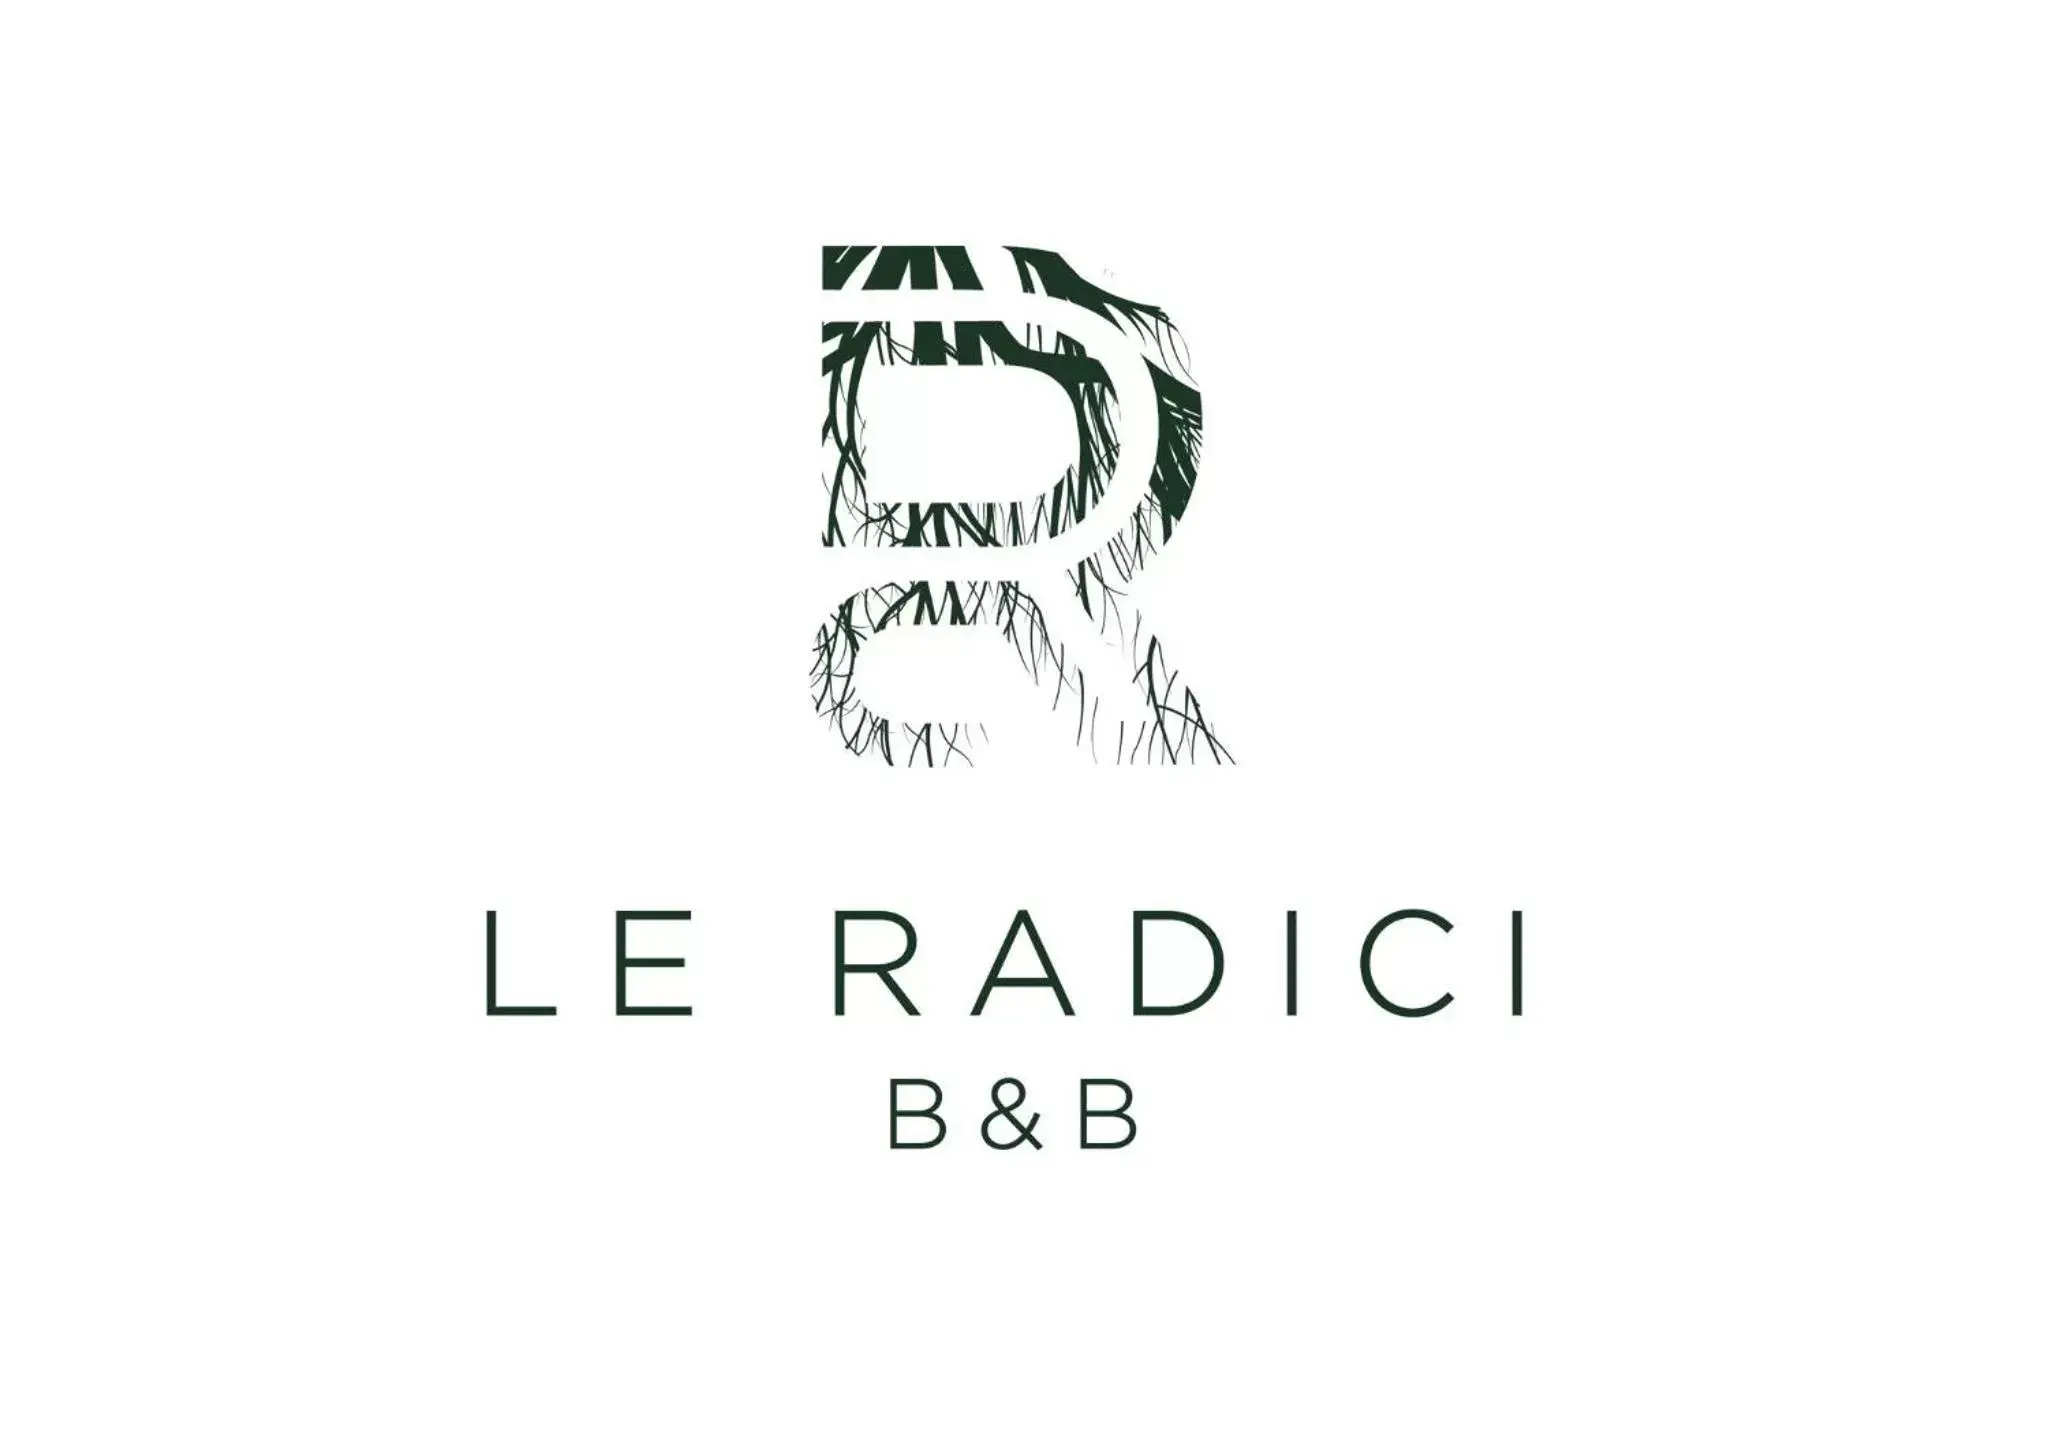 Property logo or sign in Le Radici